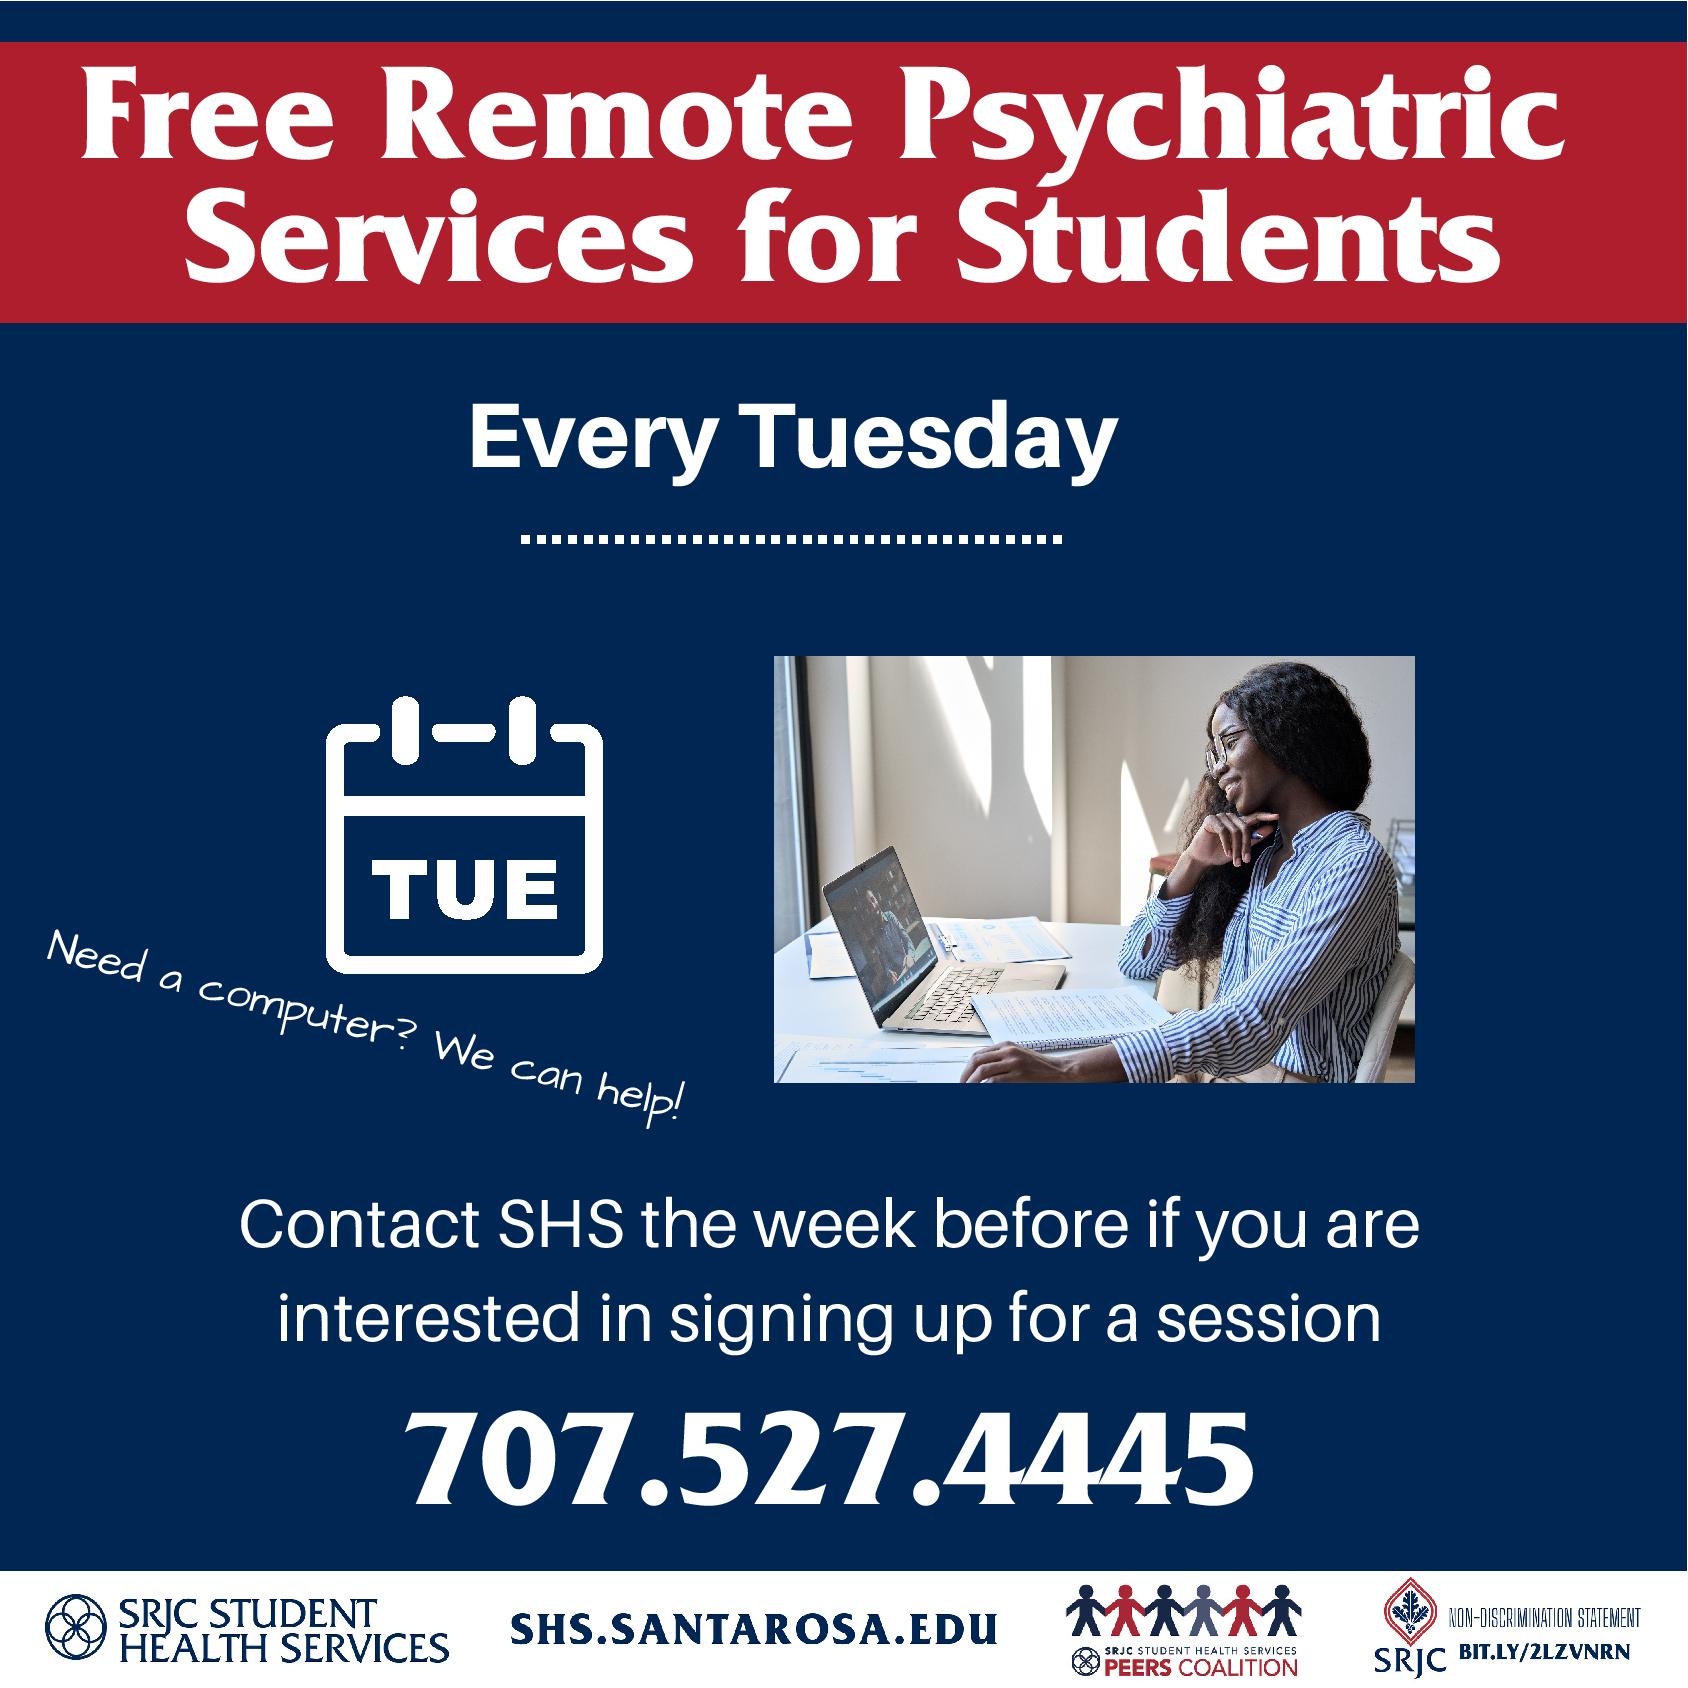 Free Remote Psychiatric Services for Students 707.527.4445 Contact SHS the week before if you are interested in signing up for a session Every Tuesday Need a computer? We can help!